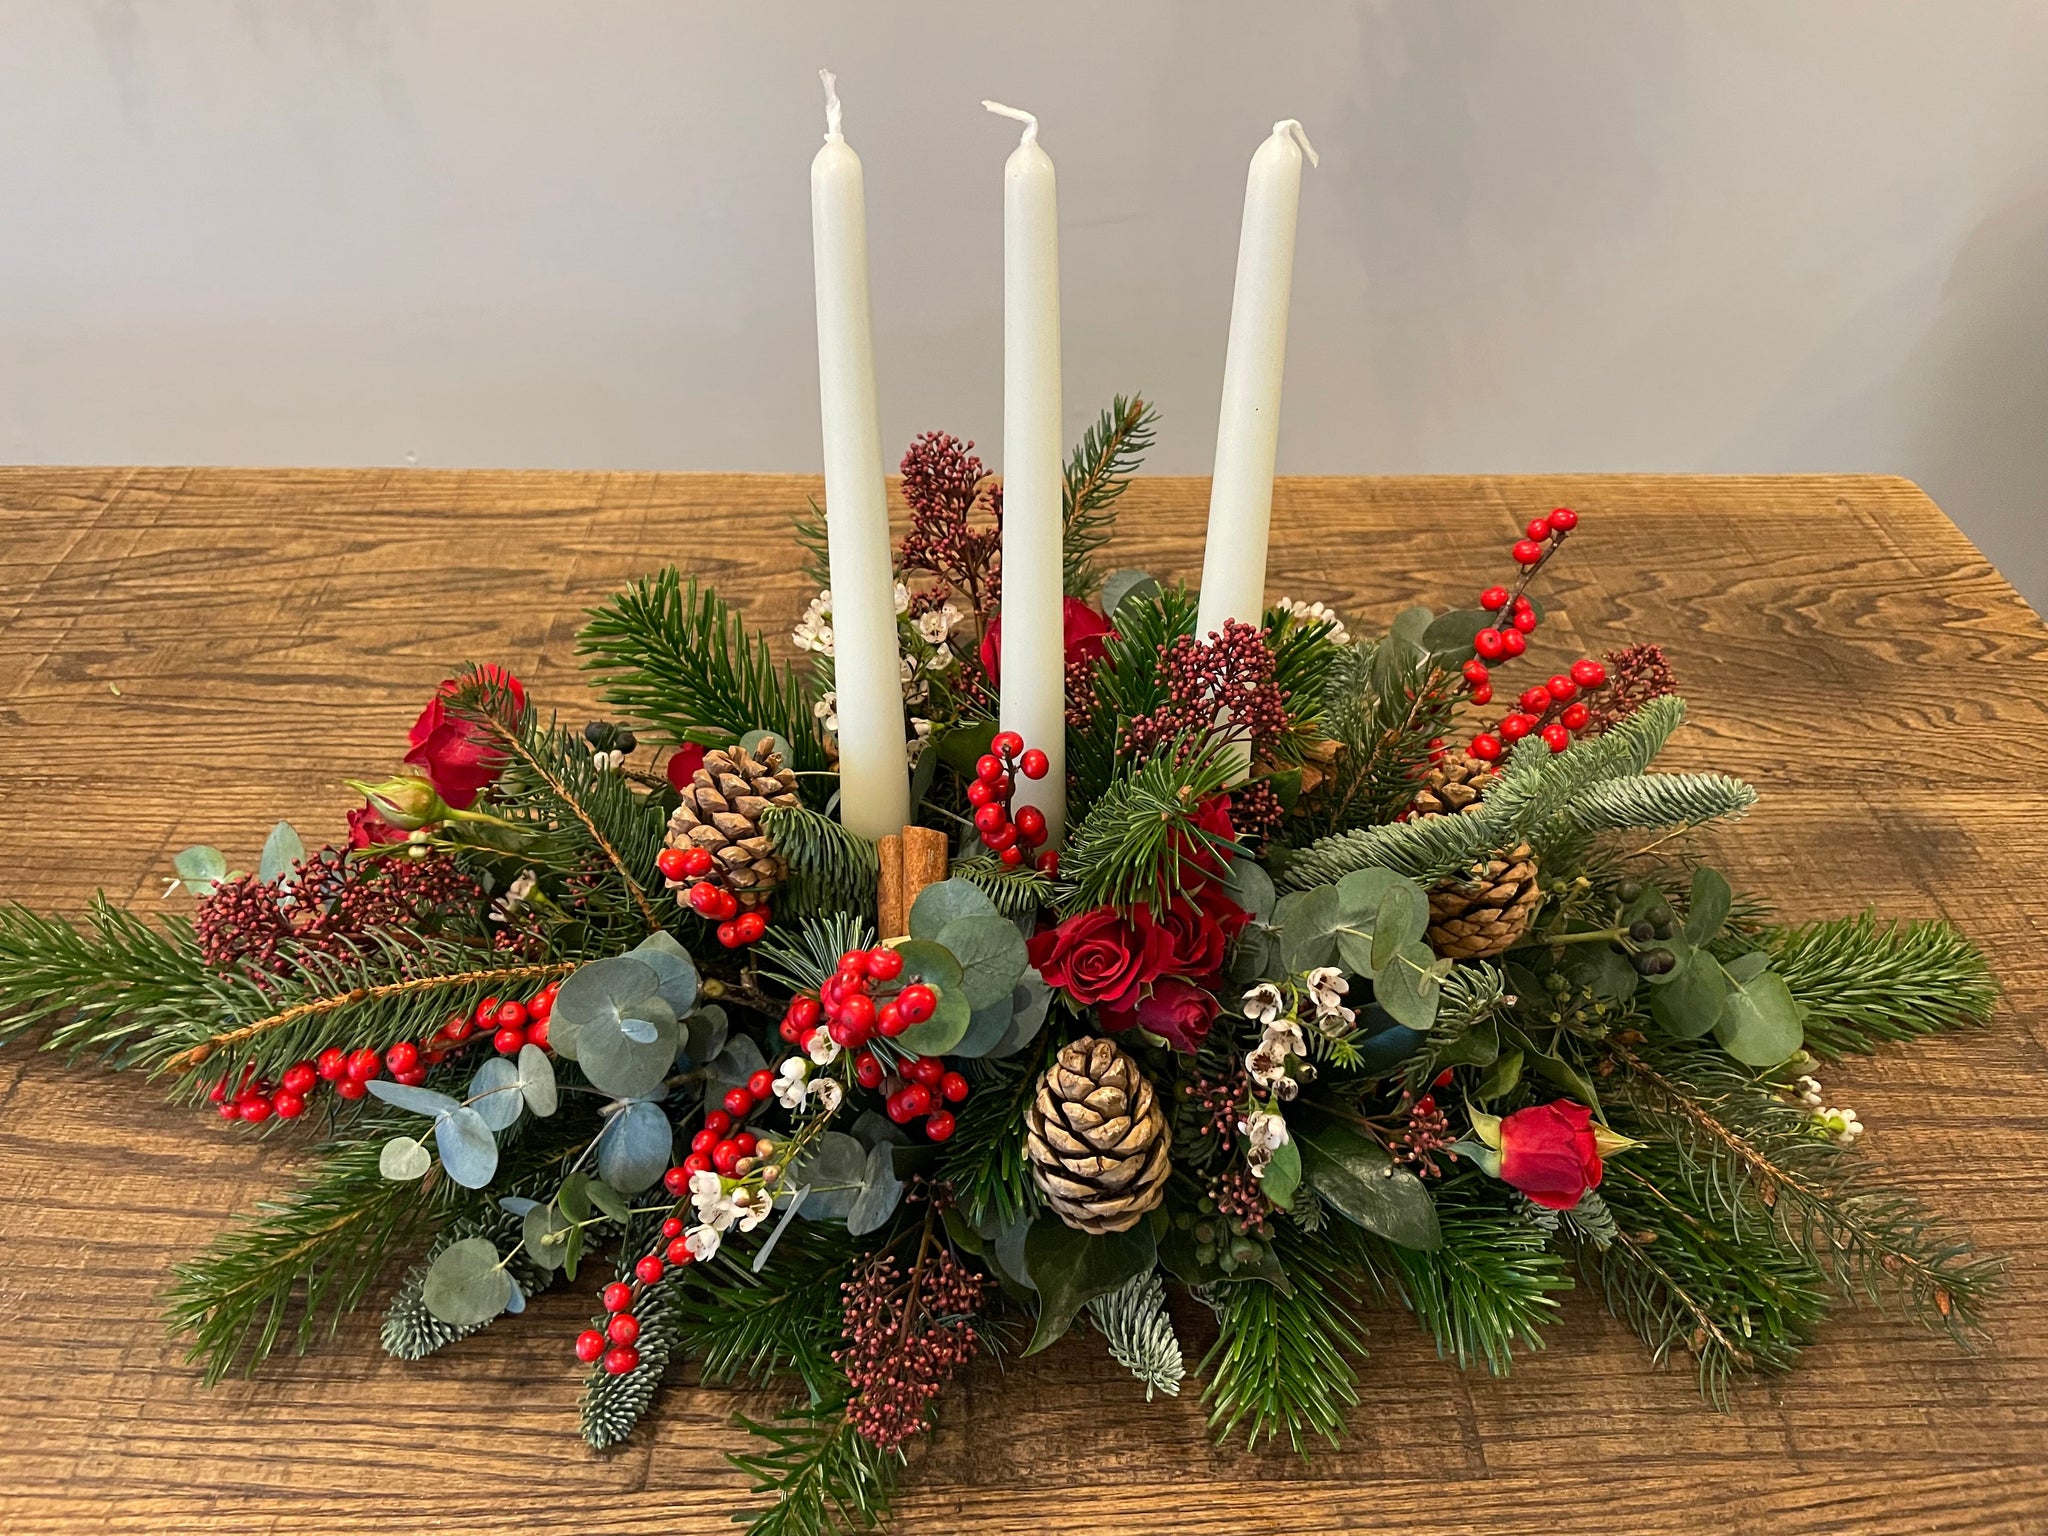 Christmas Table Centerpiece Workshop – Monday 18th December, Starting @ 11am (£75 per person) 2 hours